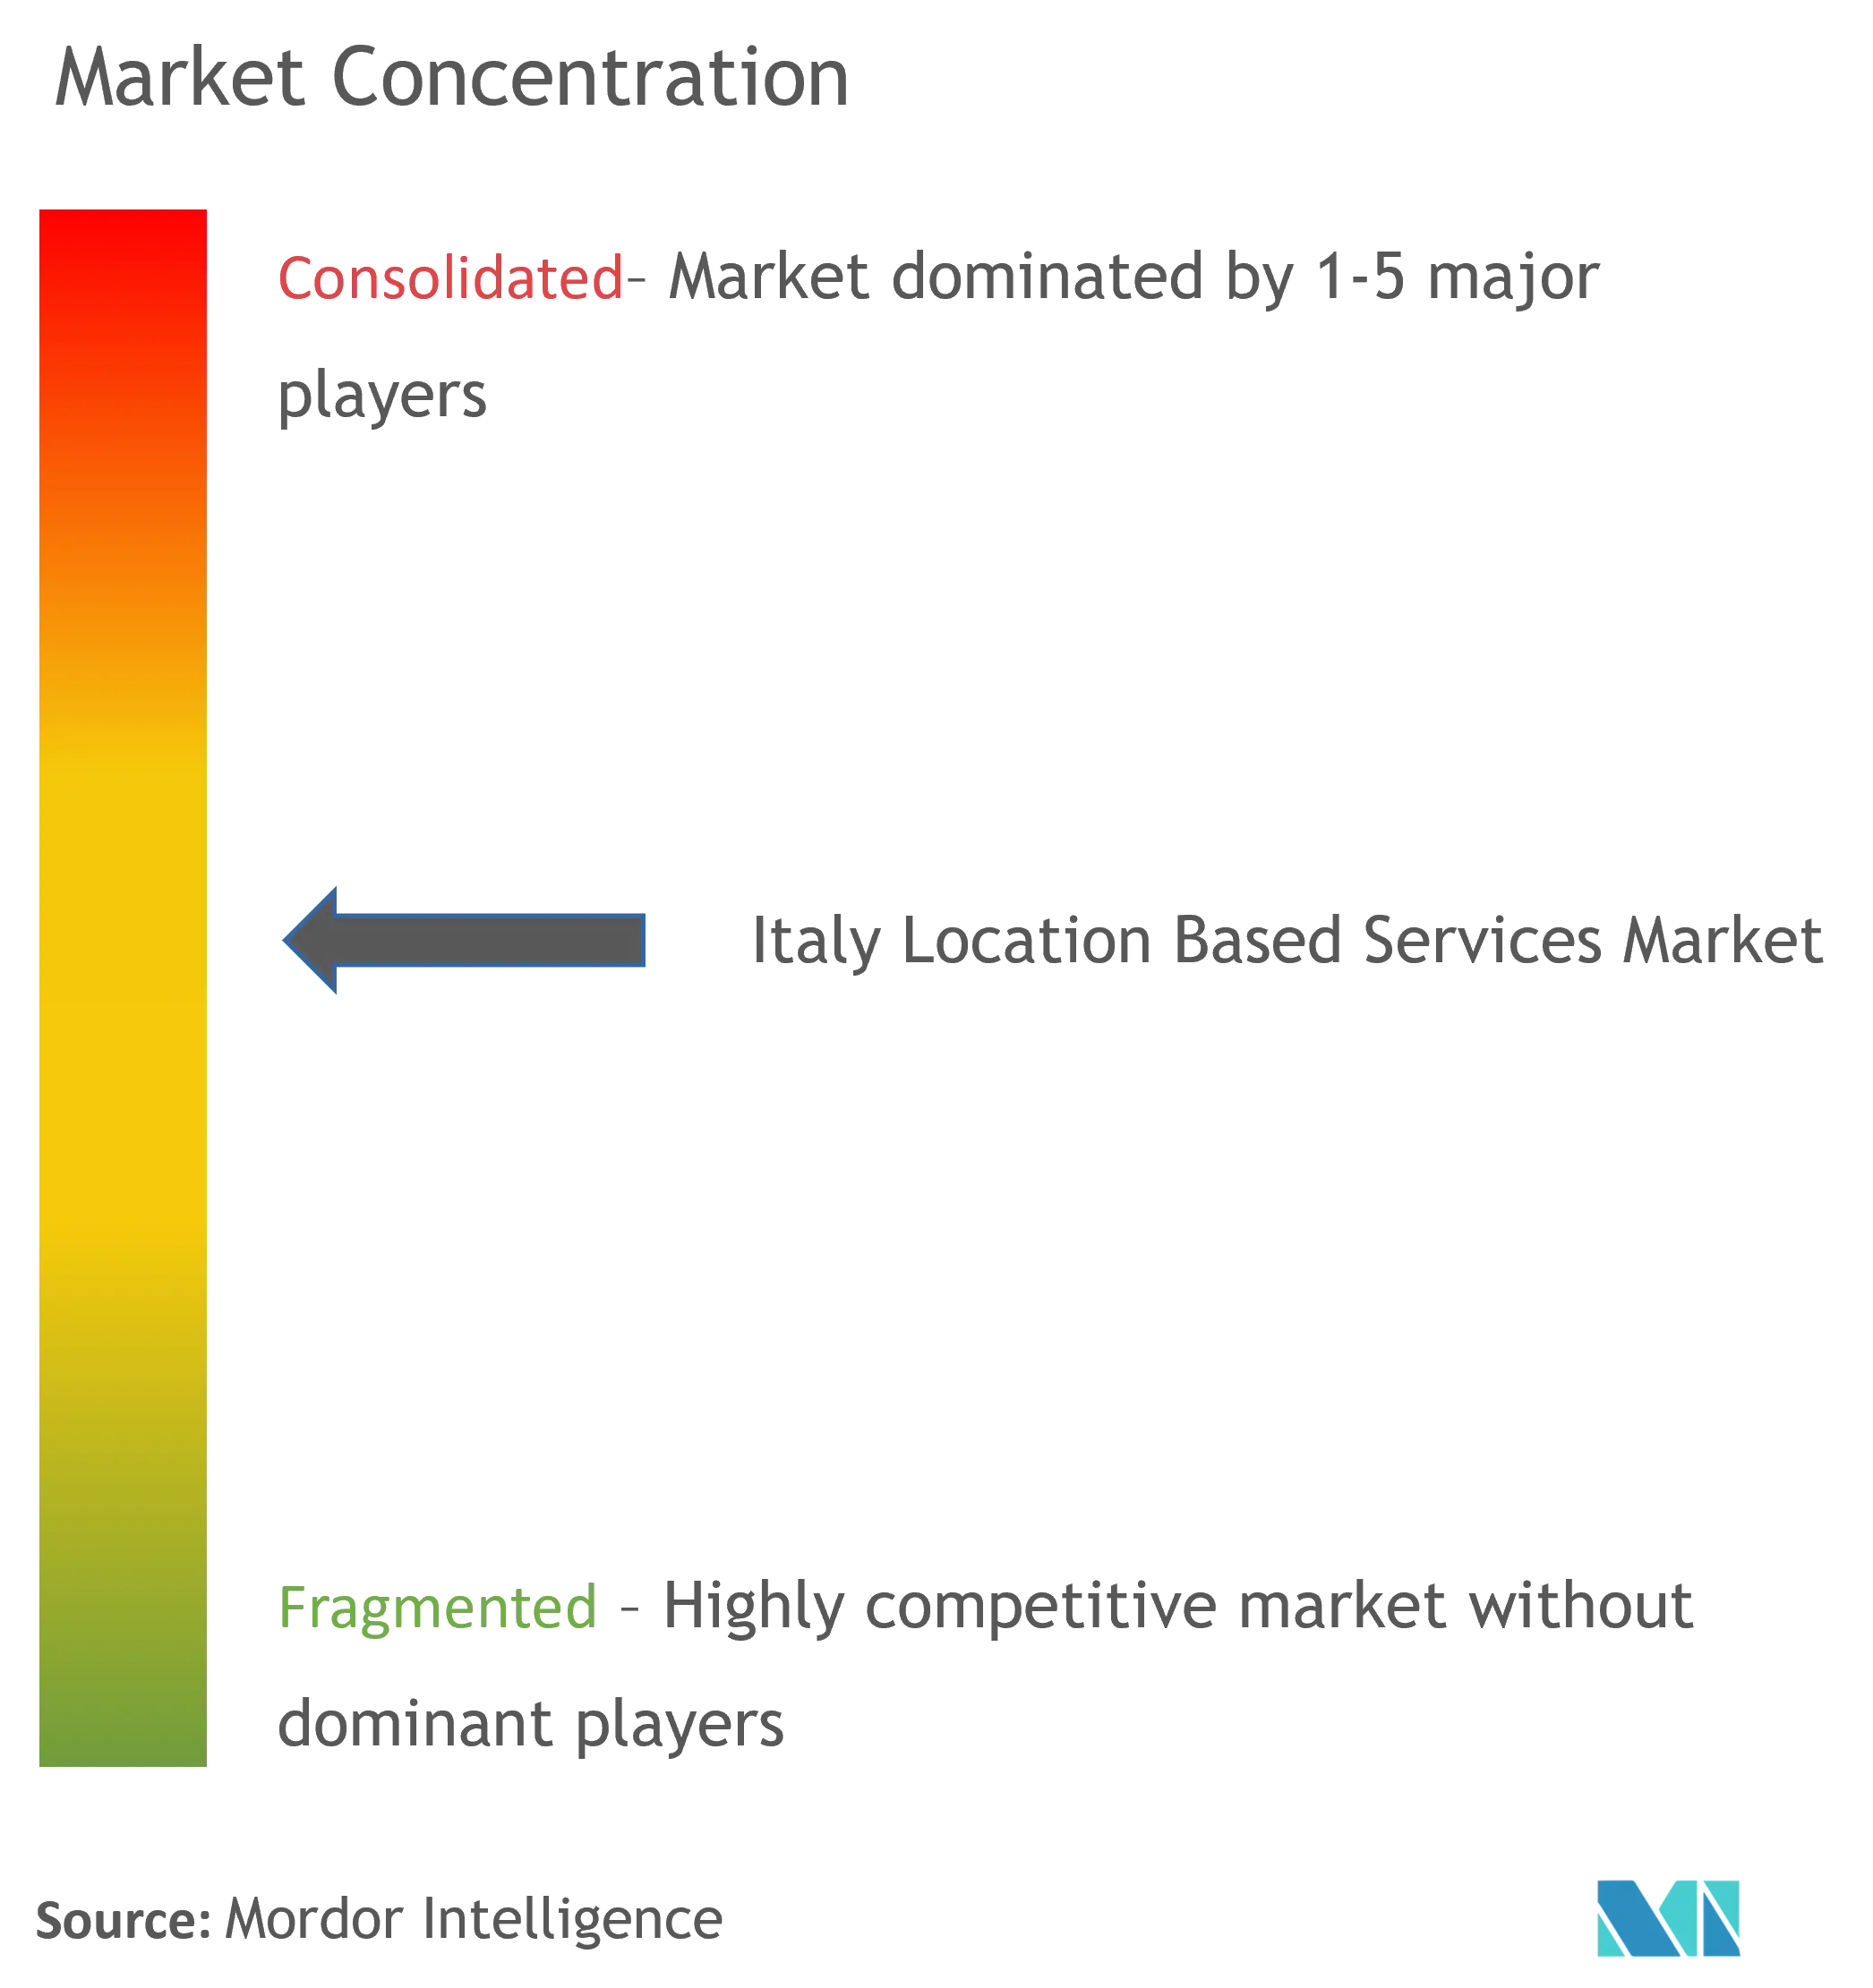 Italy Location-Based Services Market Concentration